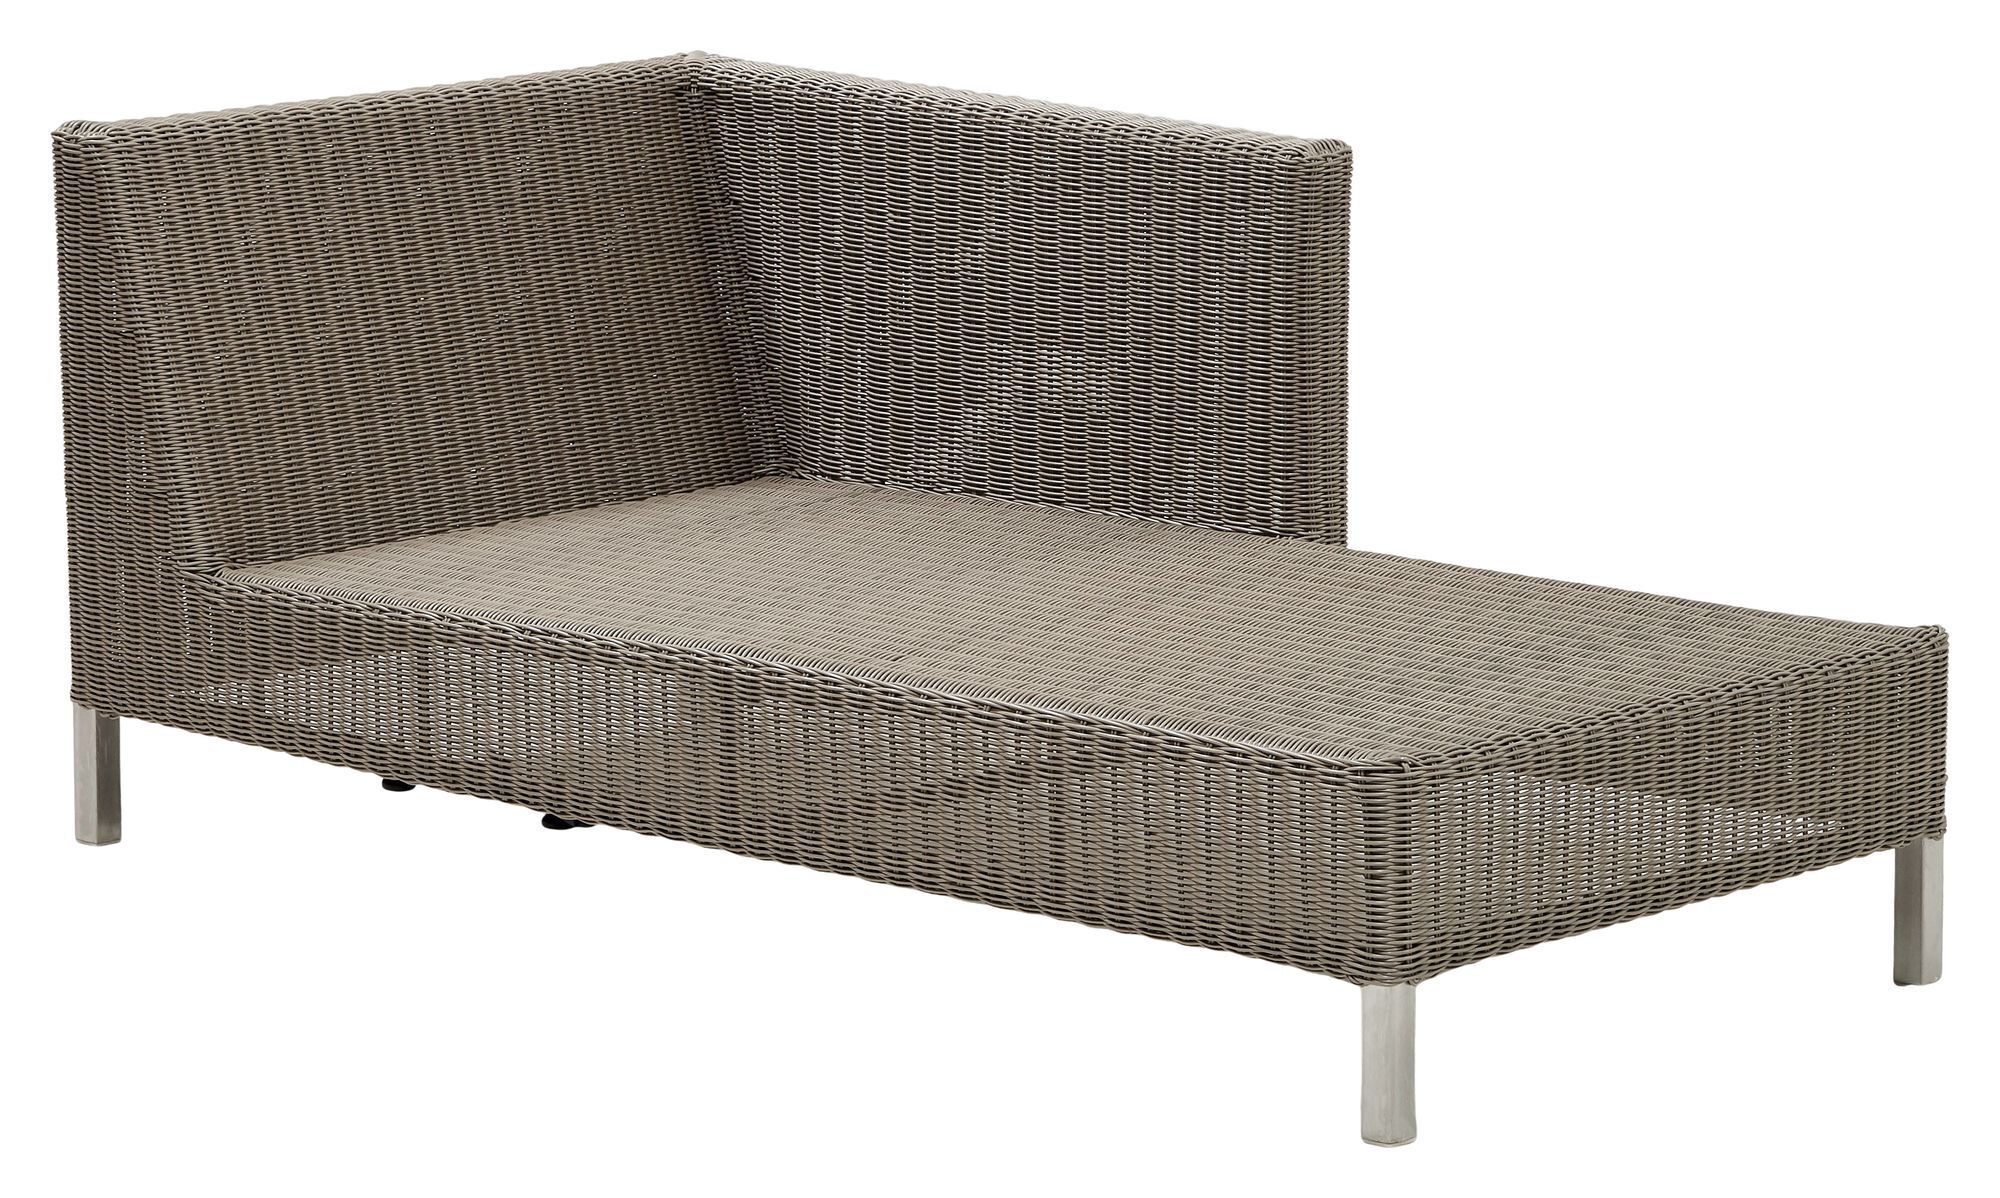 Cane-line Connect sjeselongmodul høyre, Taupe   Unoliving